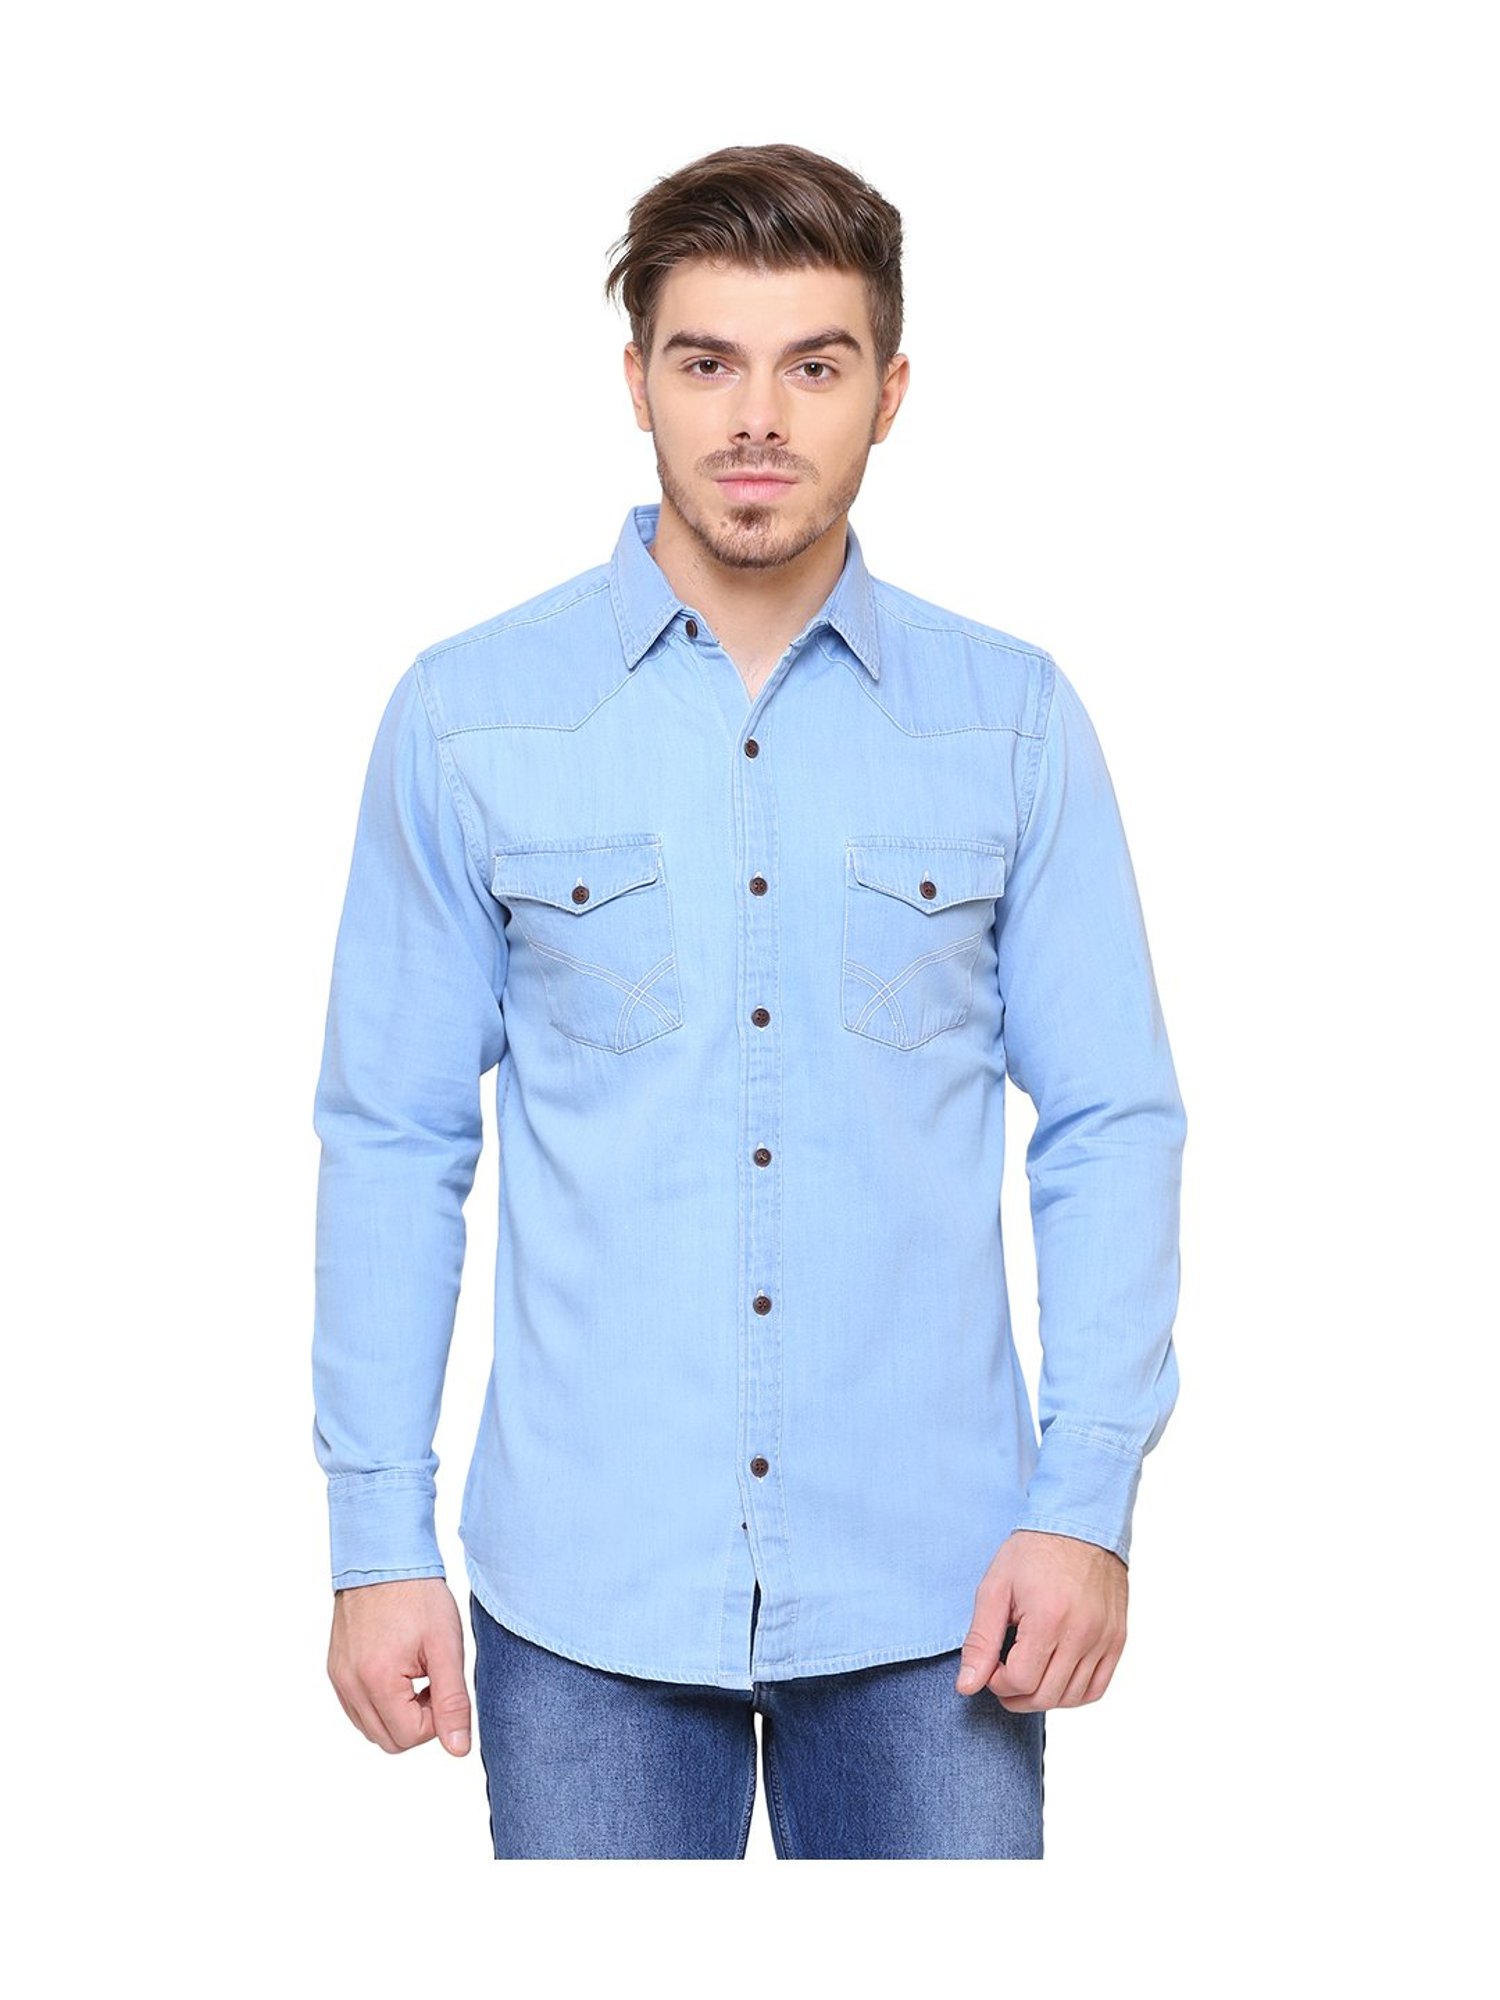 Men Solid Casual Shirts 7200.8, Size : XL, XXL, XXXL, Feature : Breathable,  Eco-Friendly, Quick Dry at Rs 480 / Piece in Kolkata